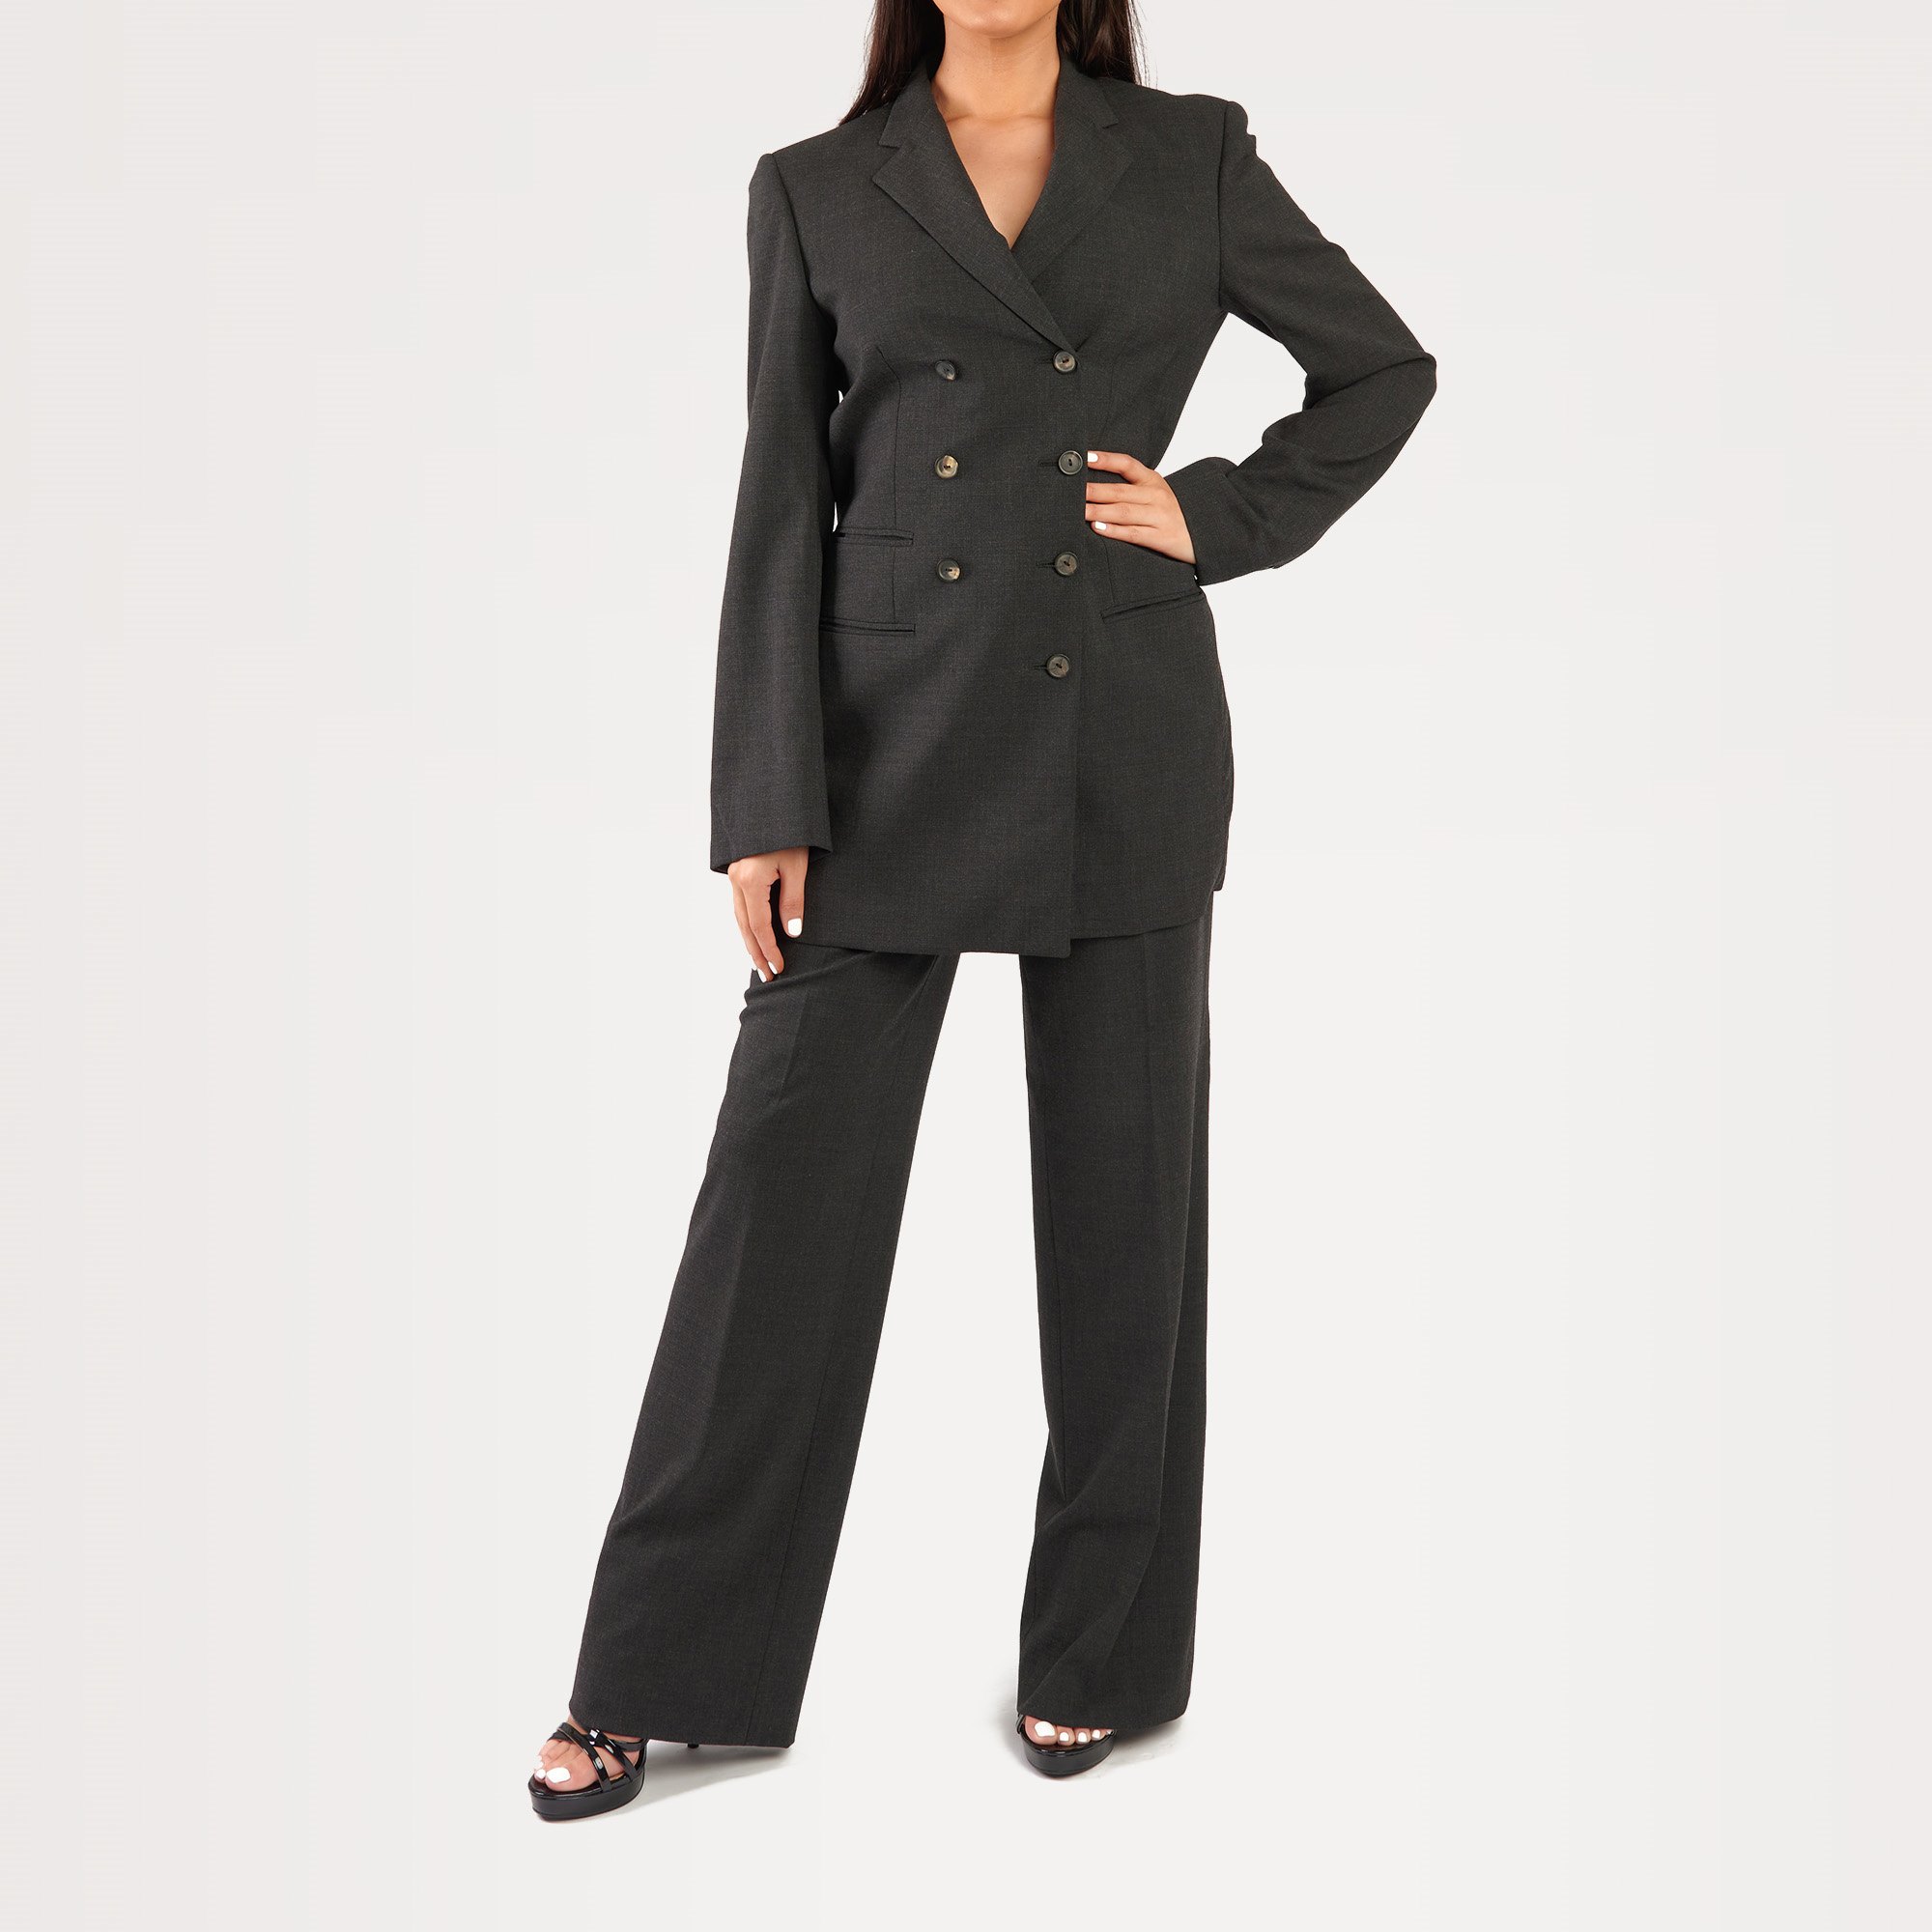 Gucci Womens Suit Ph